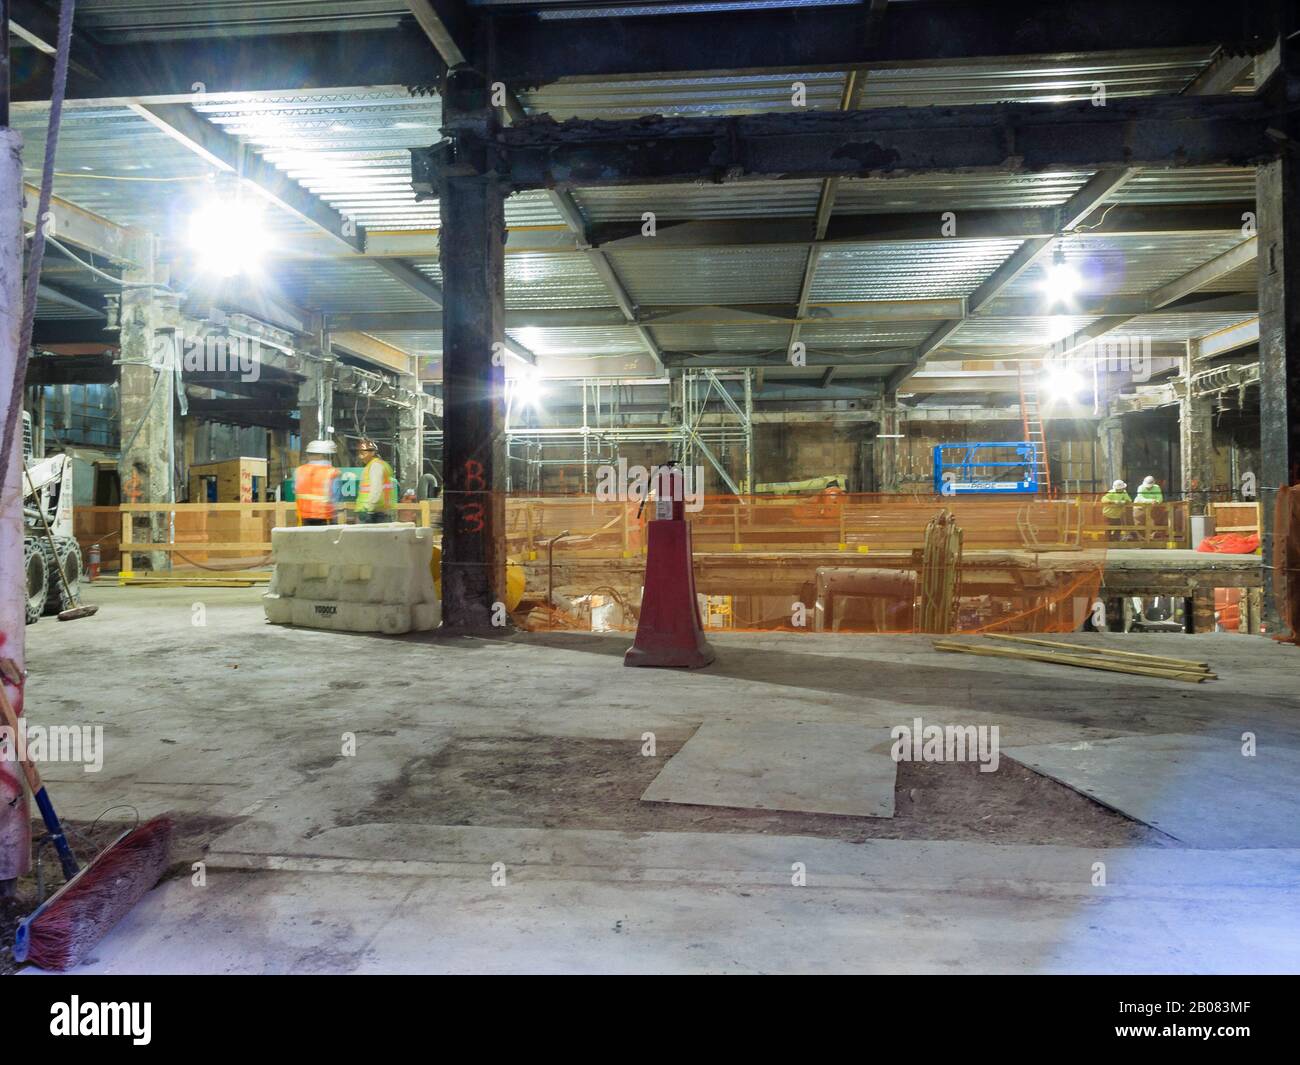 New York City candid images, interior construction,  December 14, 2015 Stock Photo